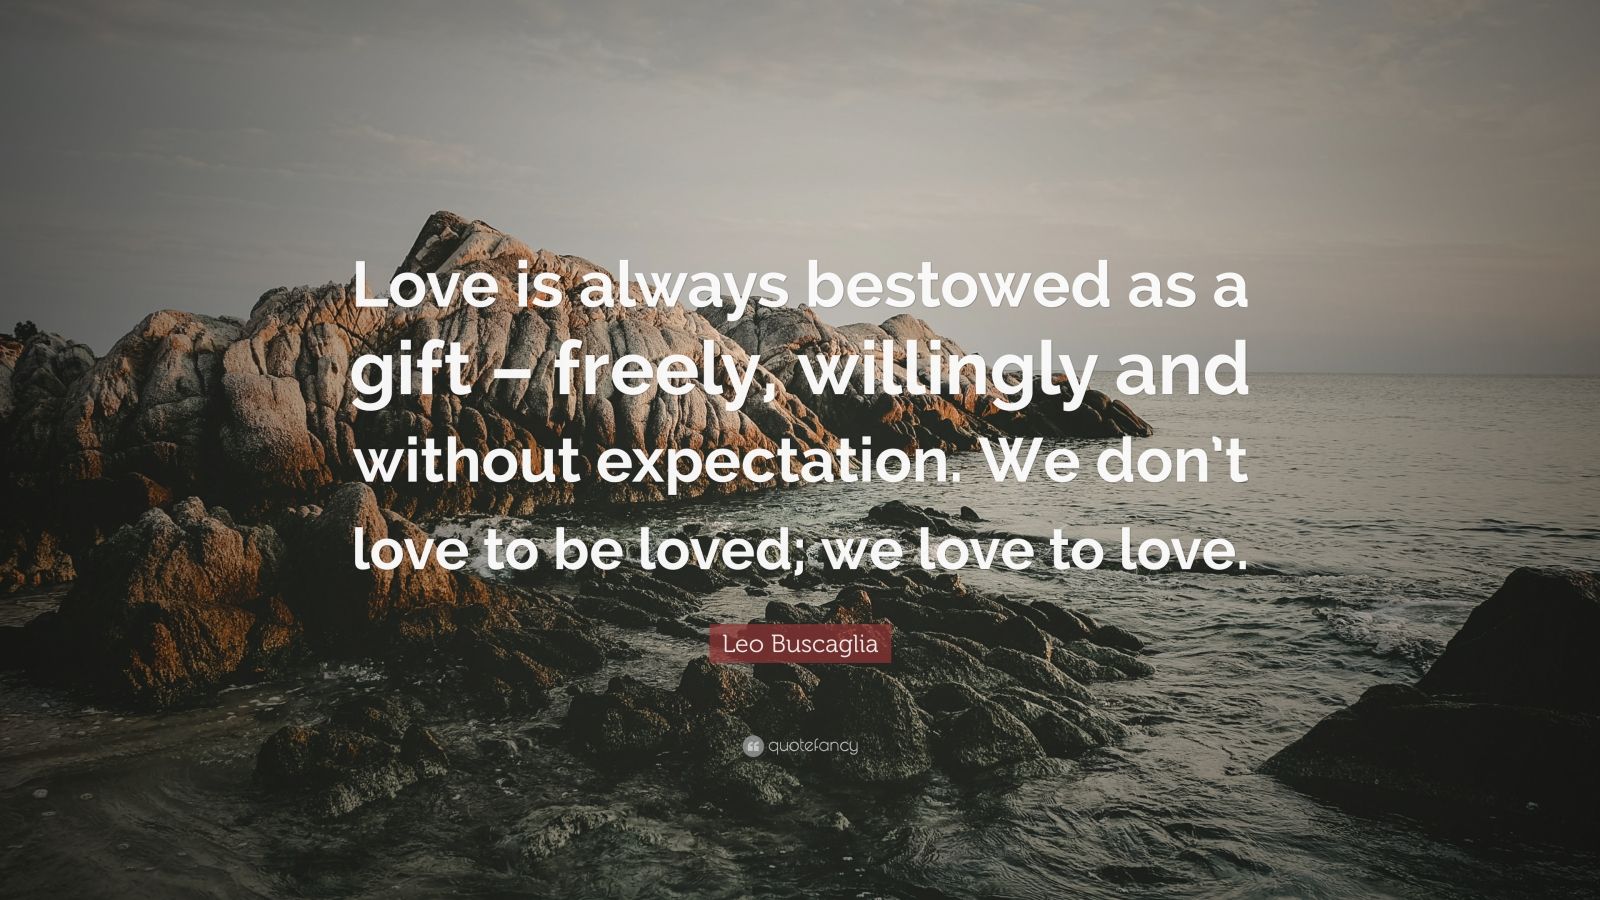 Leo Buscaglia Quote: “Love is always bestowed as a gift – freely ...